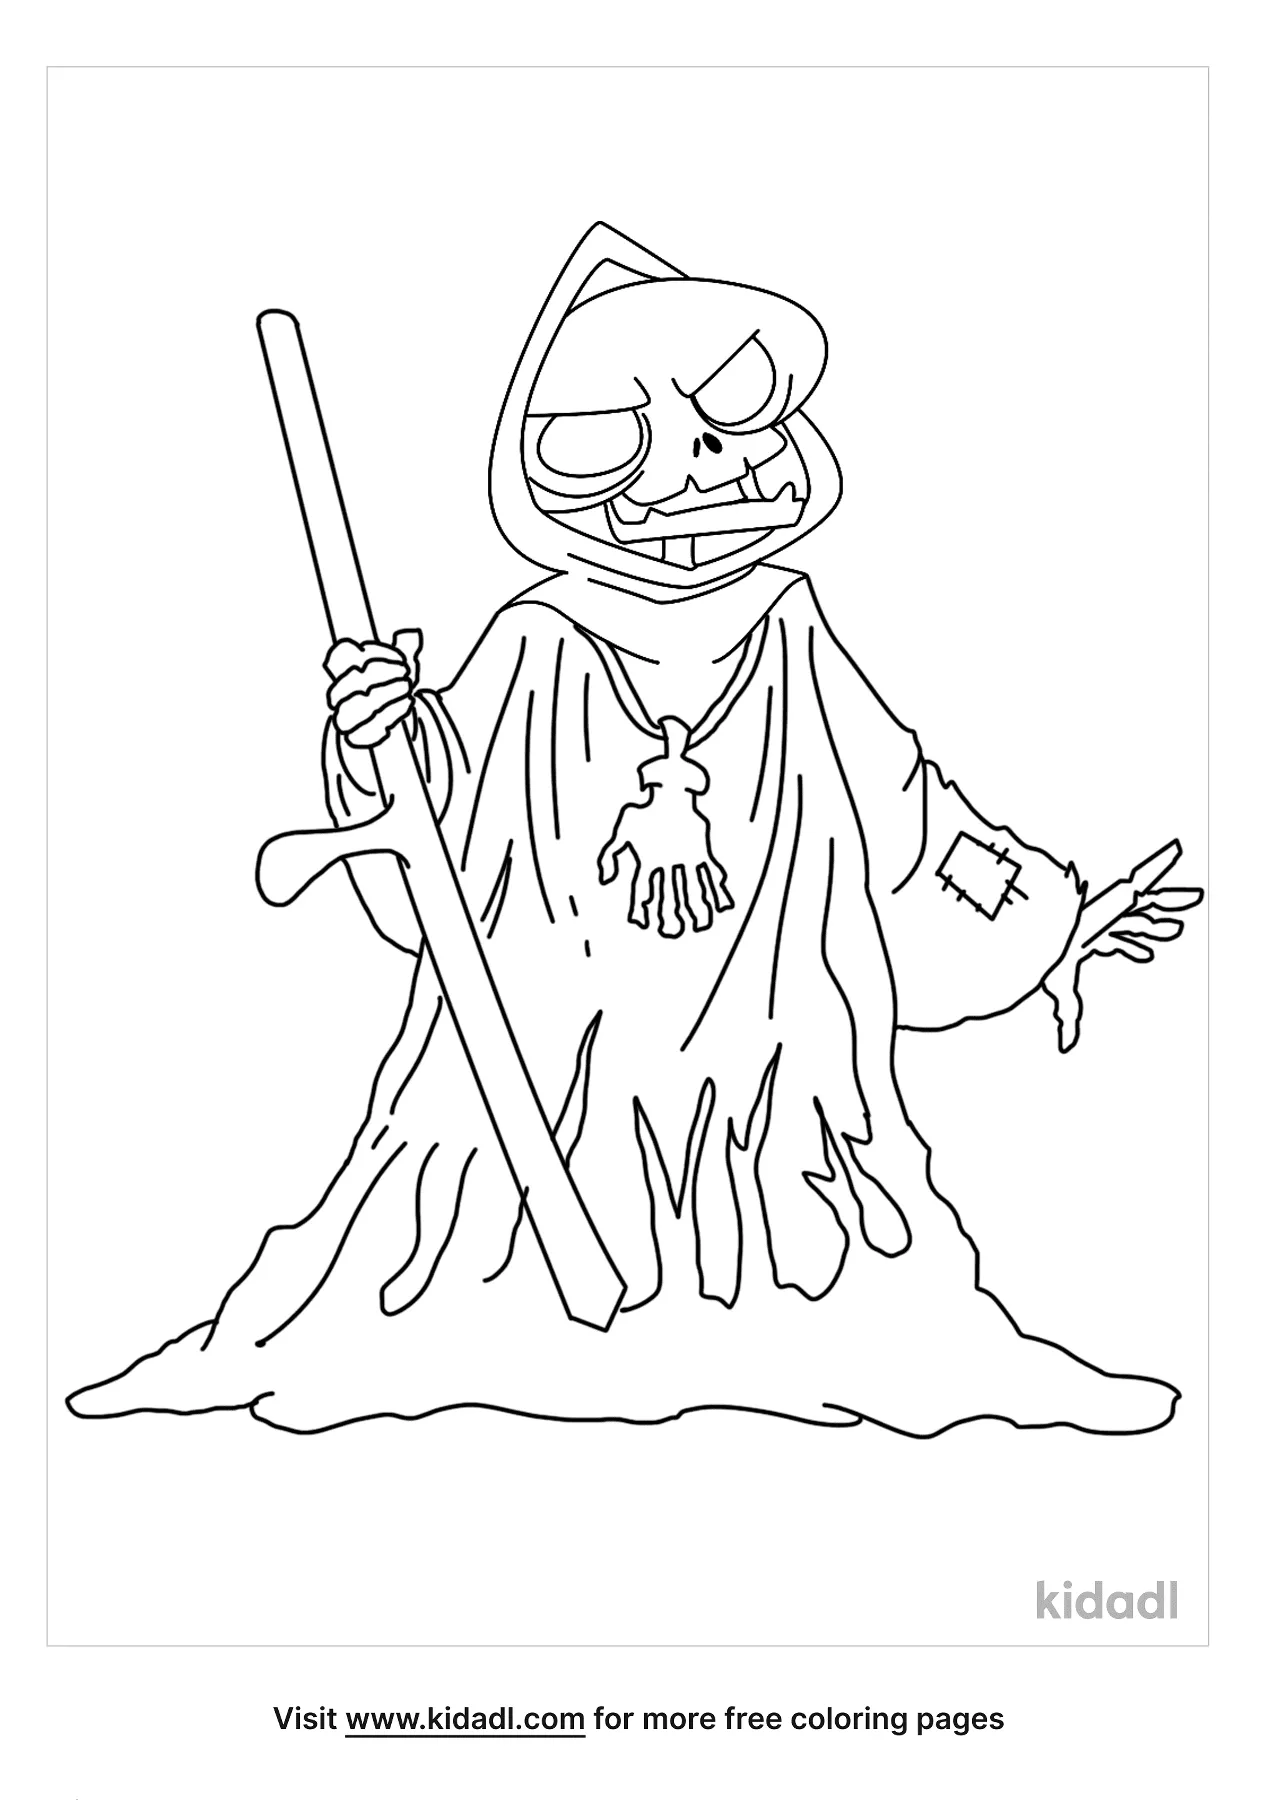 Free lava monster coloring page coloring page printables